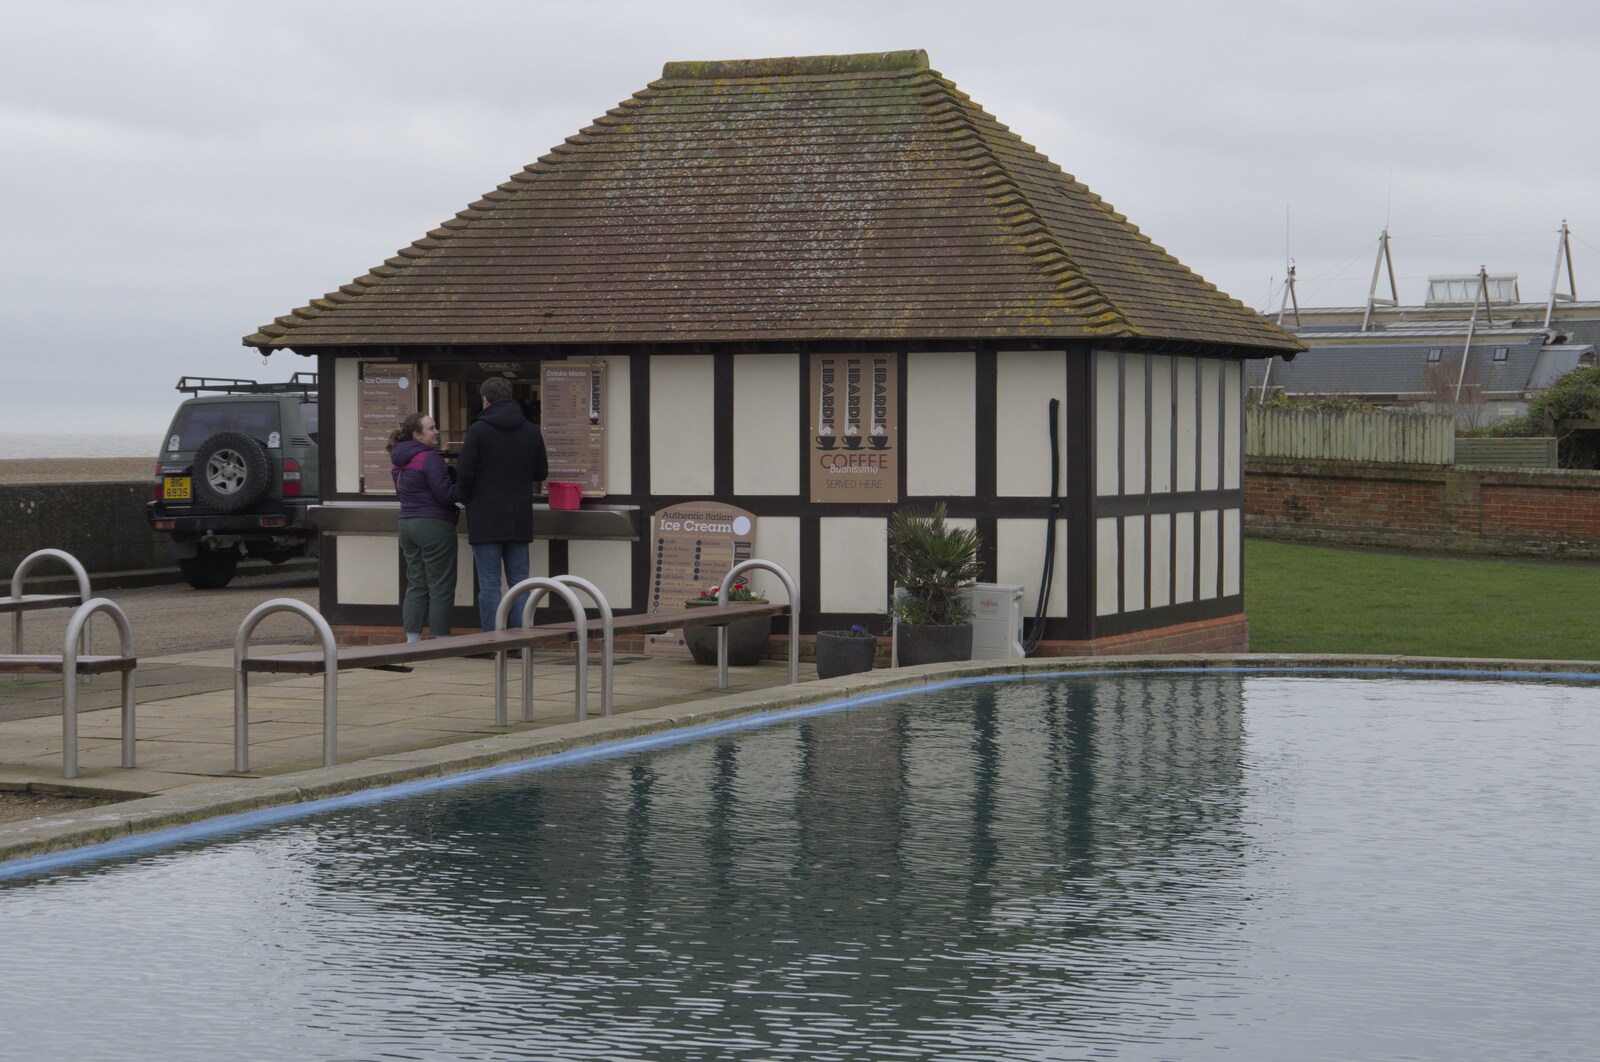 The coffee shack near the model boat pond from Framlingham, Aldeburgh and the USAAF Heritage Trust, Hoxne, Suffolk - 14th February 2024 